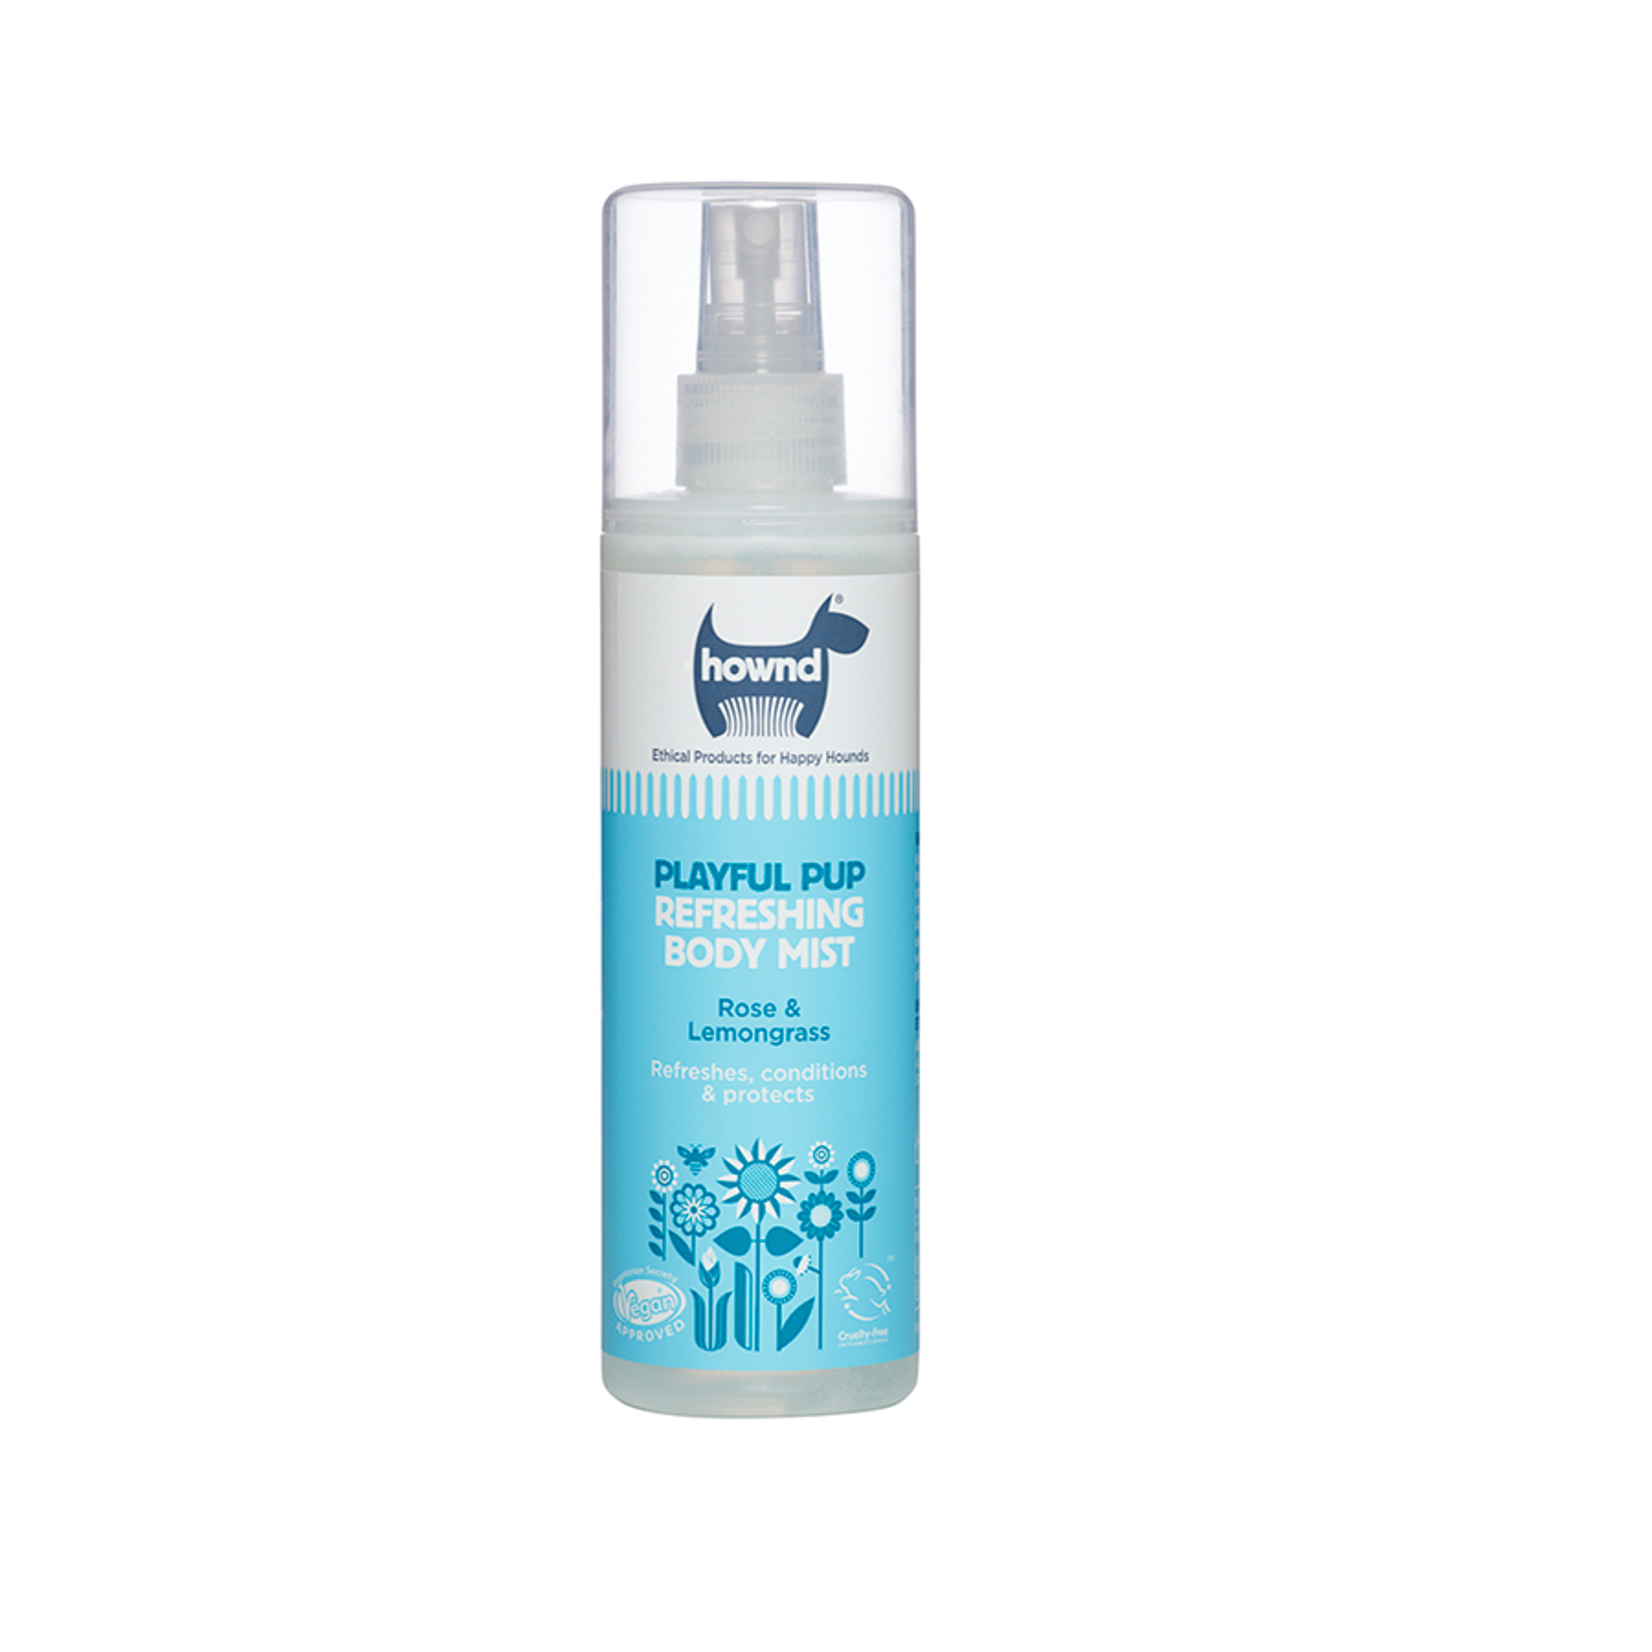 Hownd Playful Pup Refreshing Body Mist Hownd